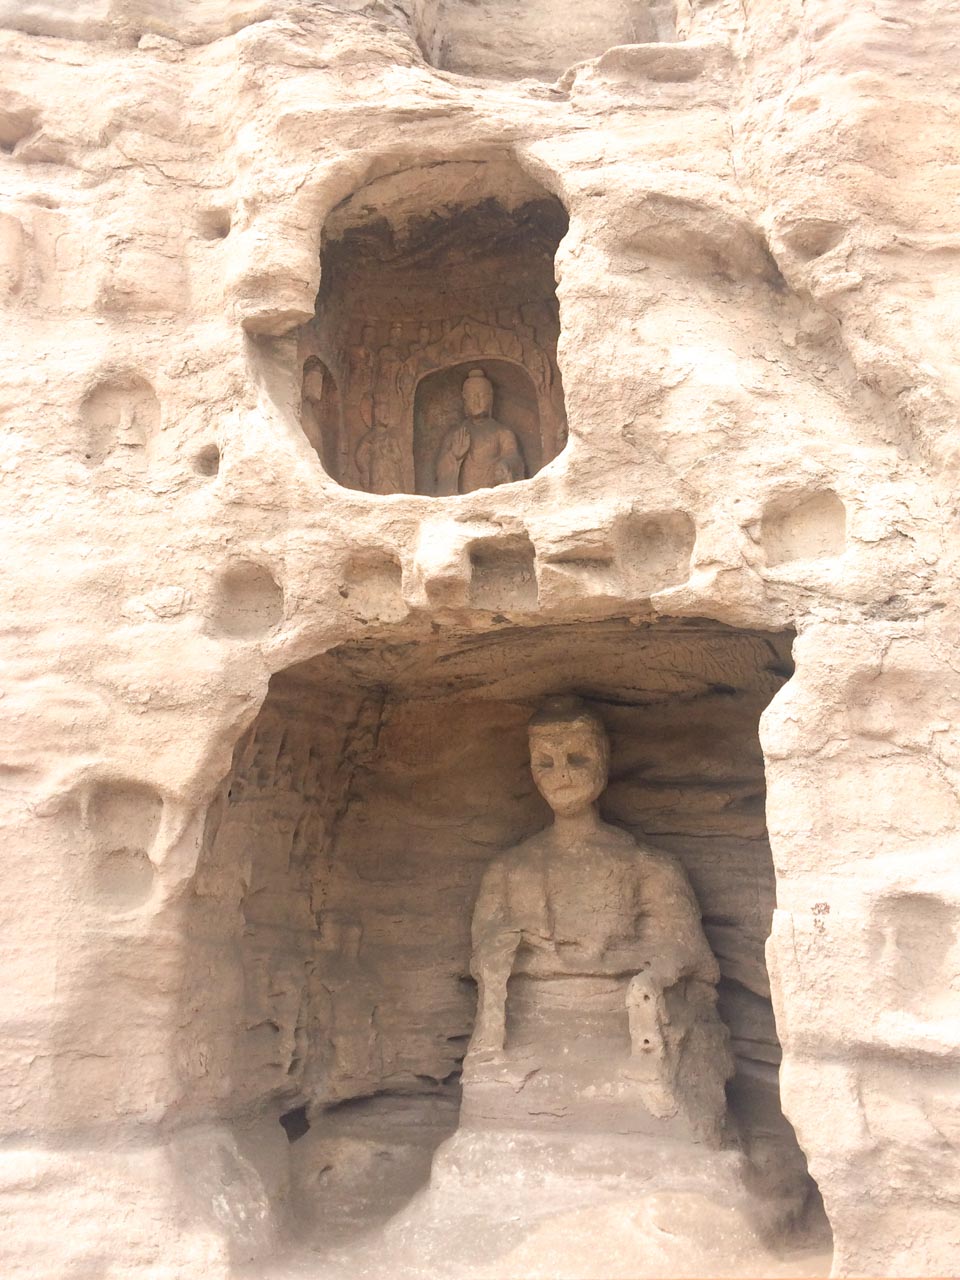 Statues carved into the cliffside at the Yungang Grottoes in Datong, Shanxi